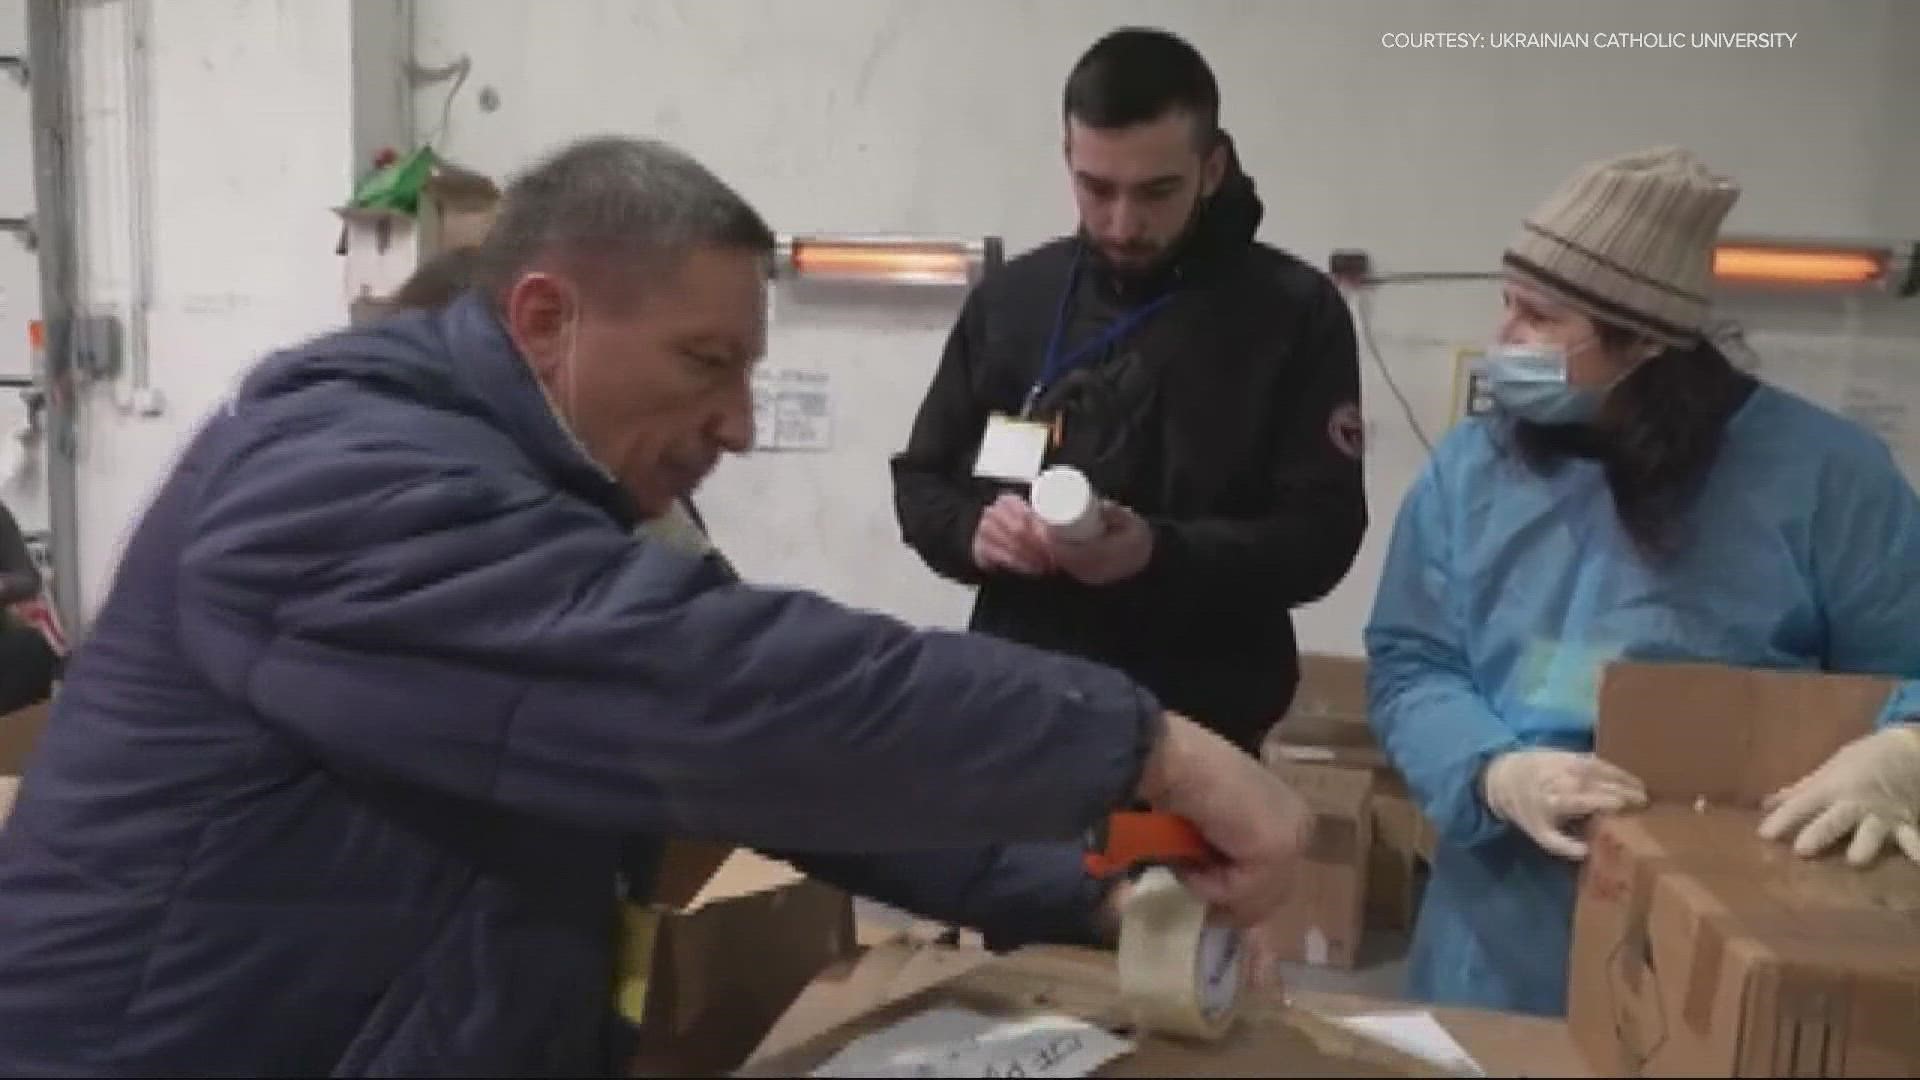 What began as a new Ukrainian Catholic university more than a decade ago is now housing refugees and much-needed supplies.